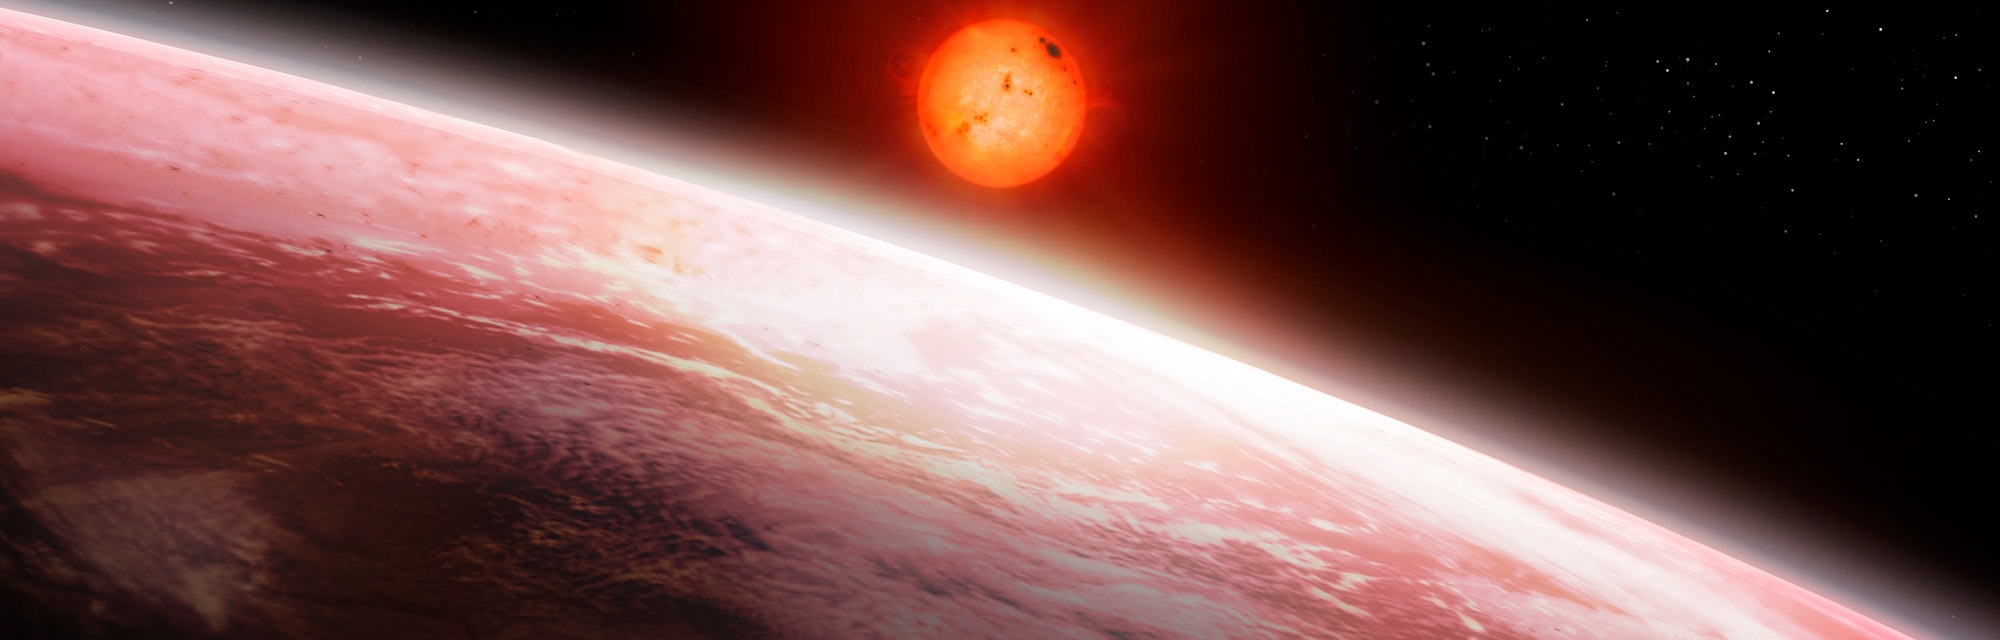 Illustration of the view from the innermost of the two exoplanets orbiting Gliese 667 C (largest sta...